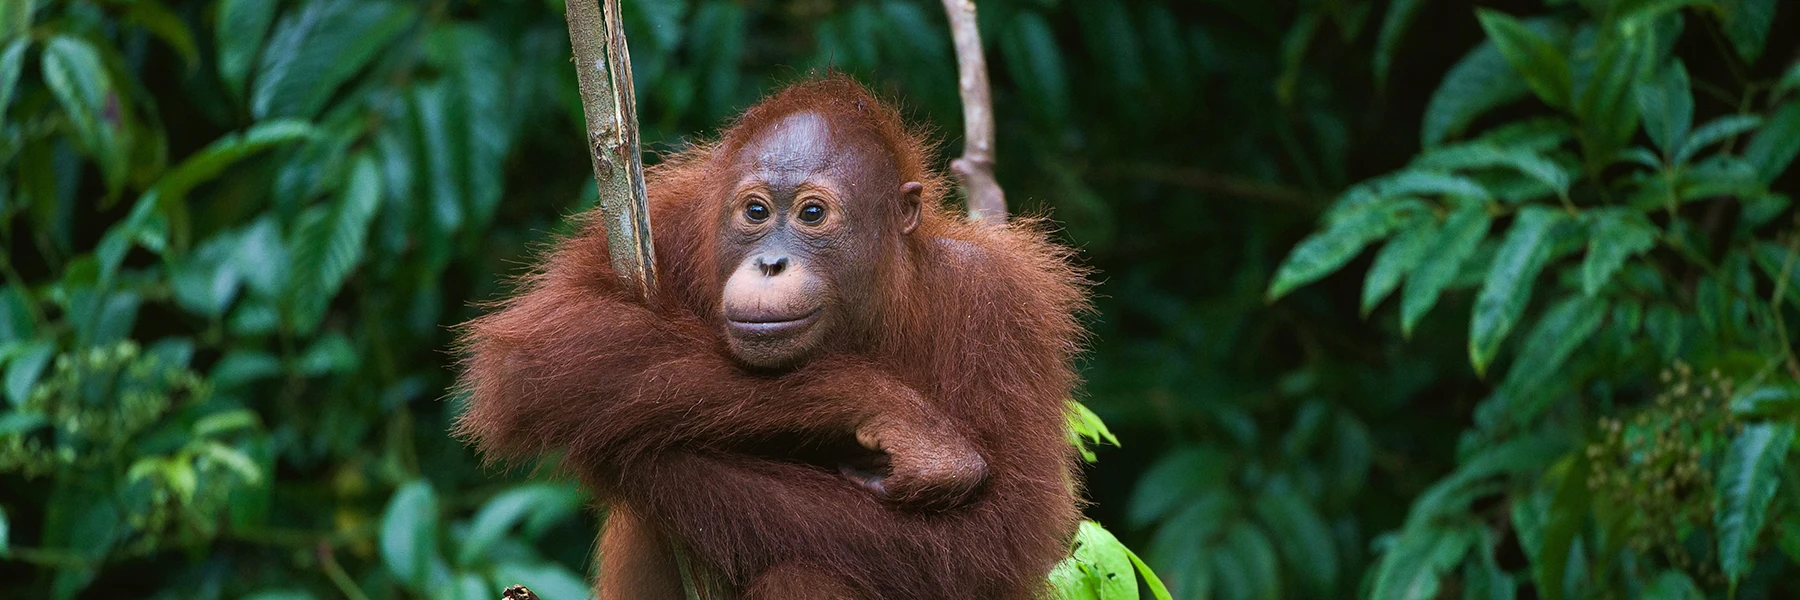 Young orangutan clinging to a branch in the Borneo rainforest